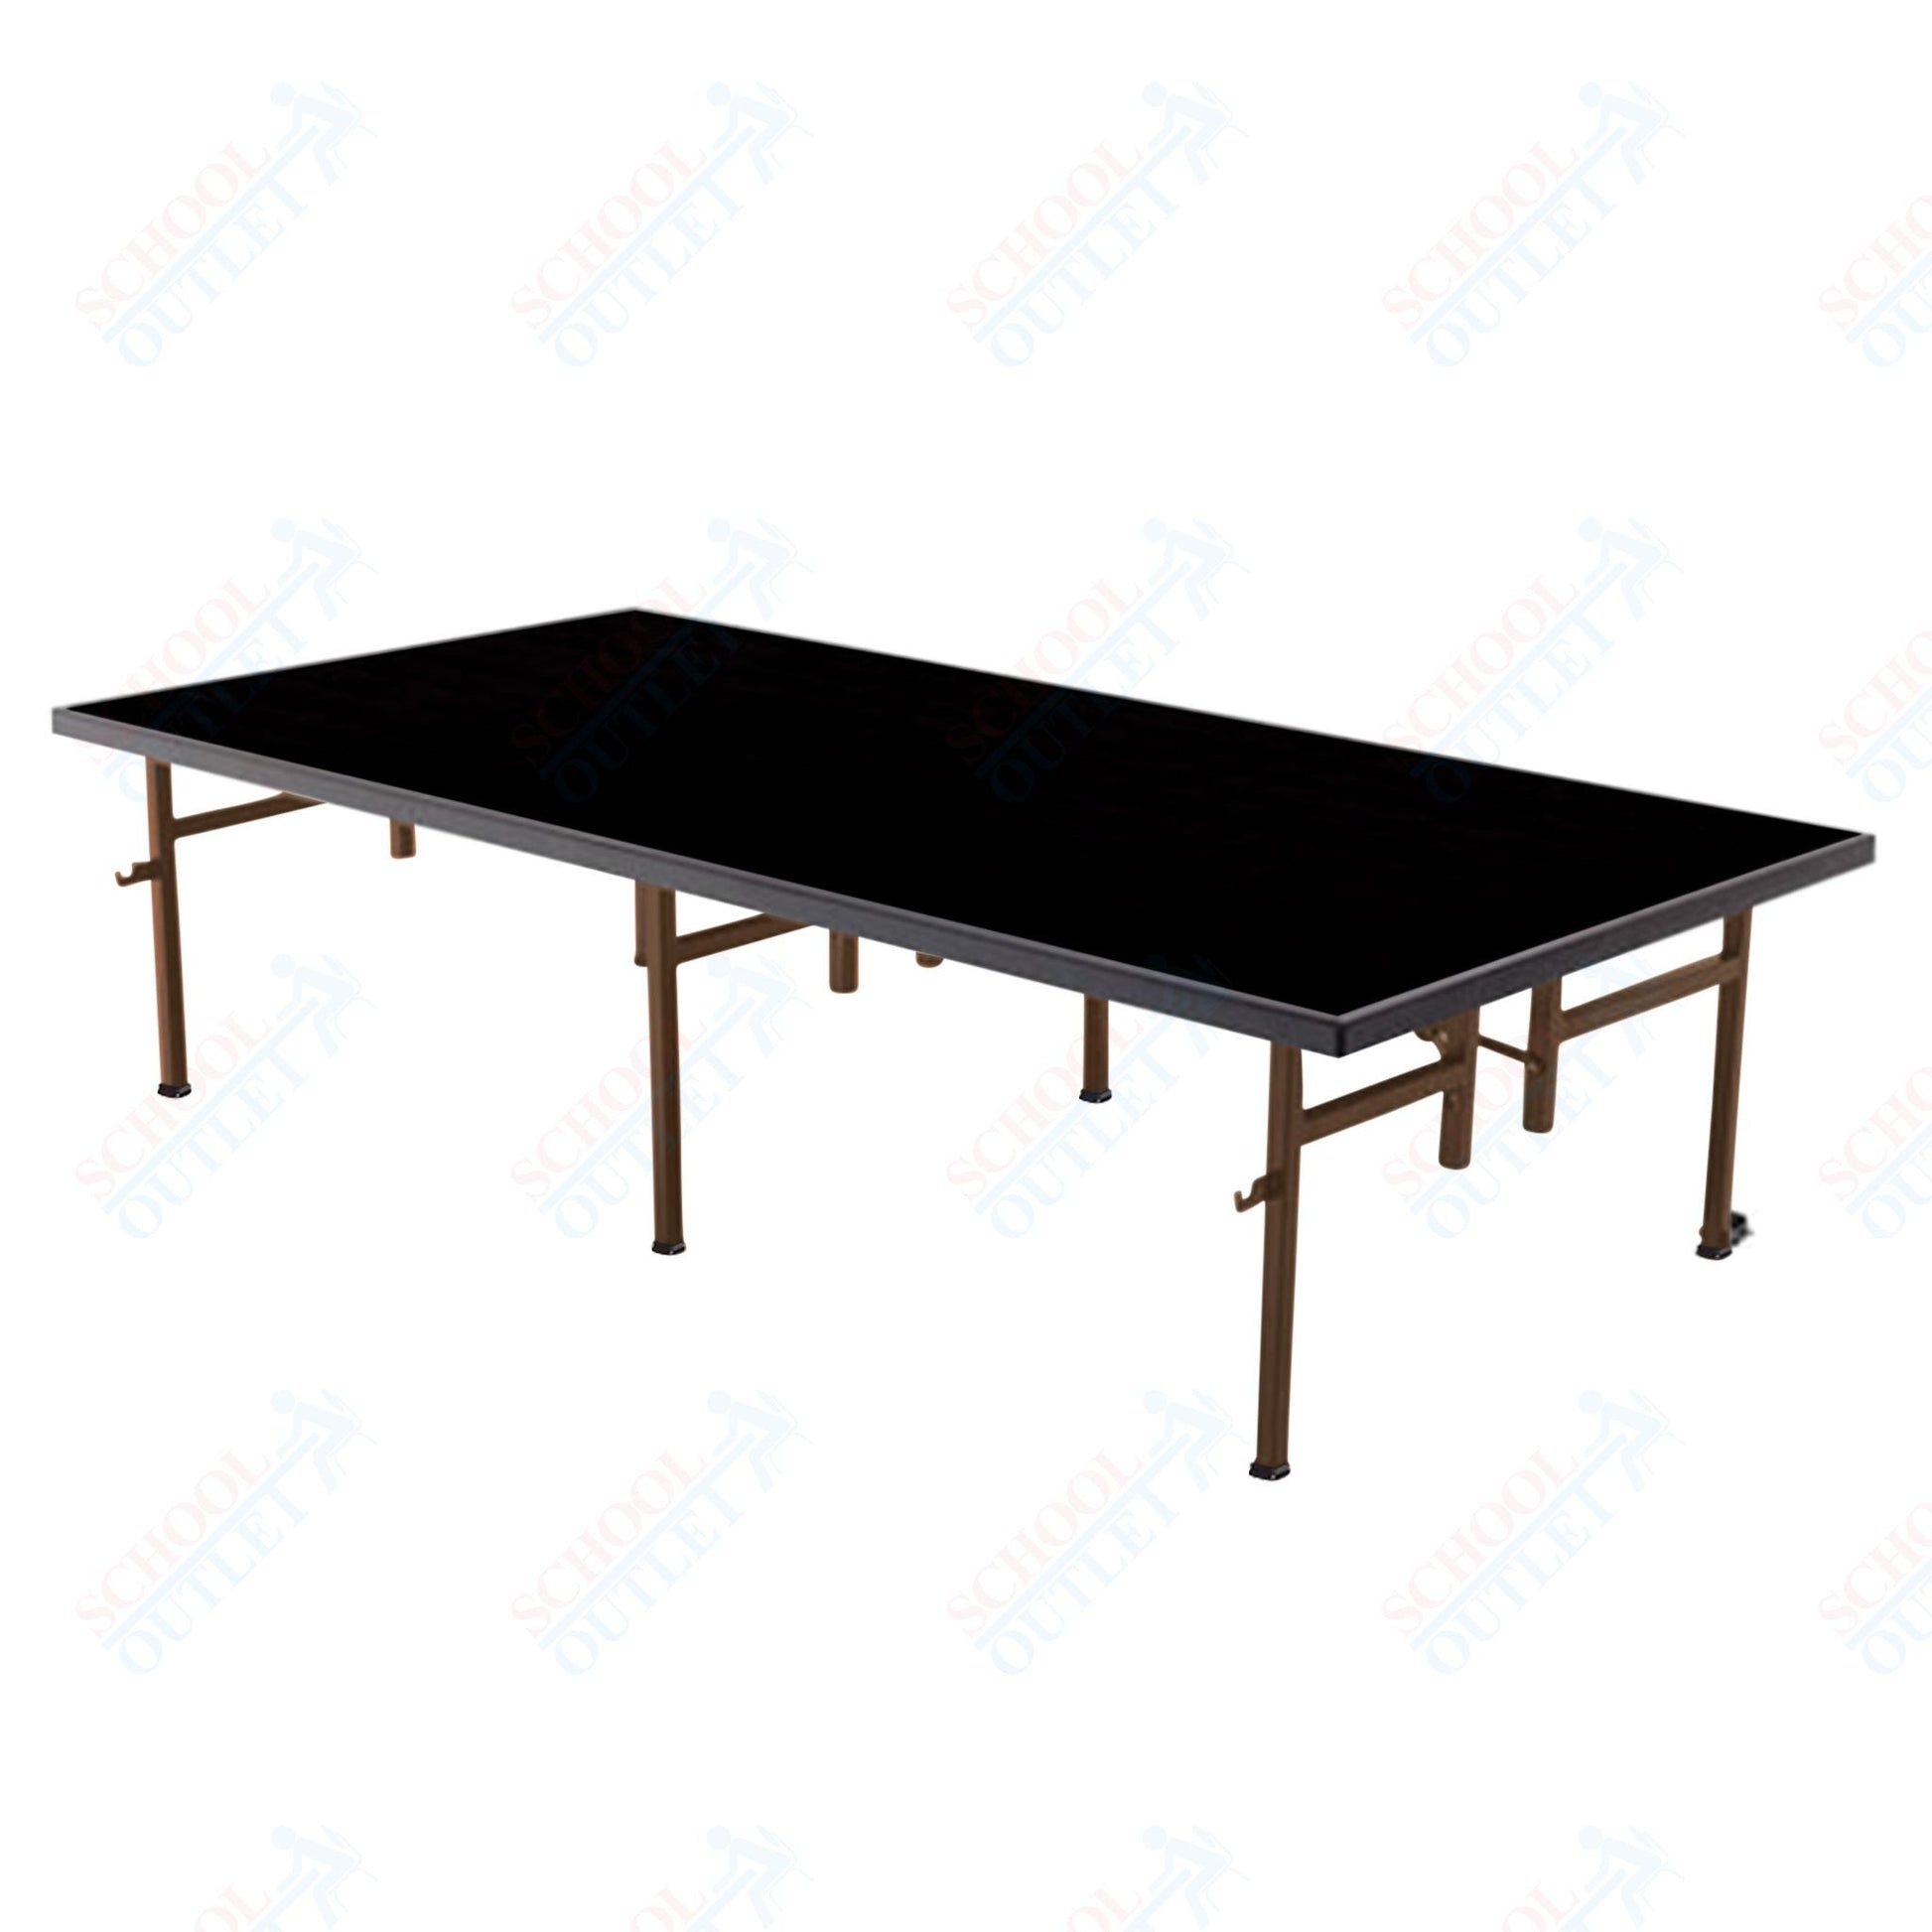 AmTab Fixed Height Stage - Polypropylene Top - 36"W x 48"L x 16"H (AmTab AMT - ST3416P) - SchoolOutlet